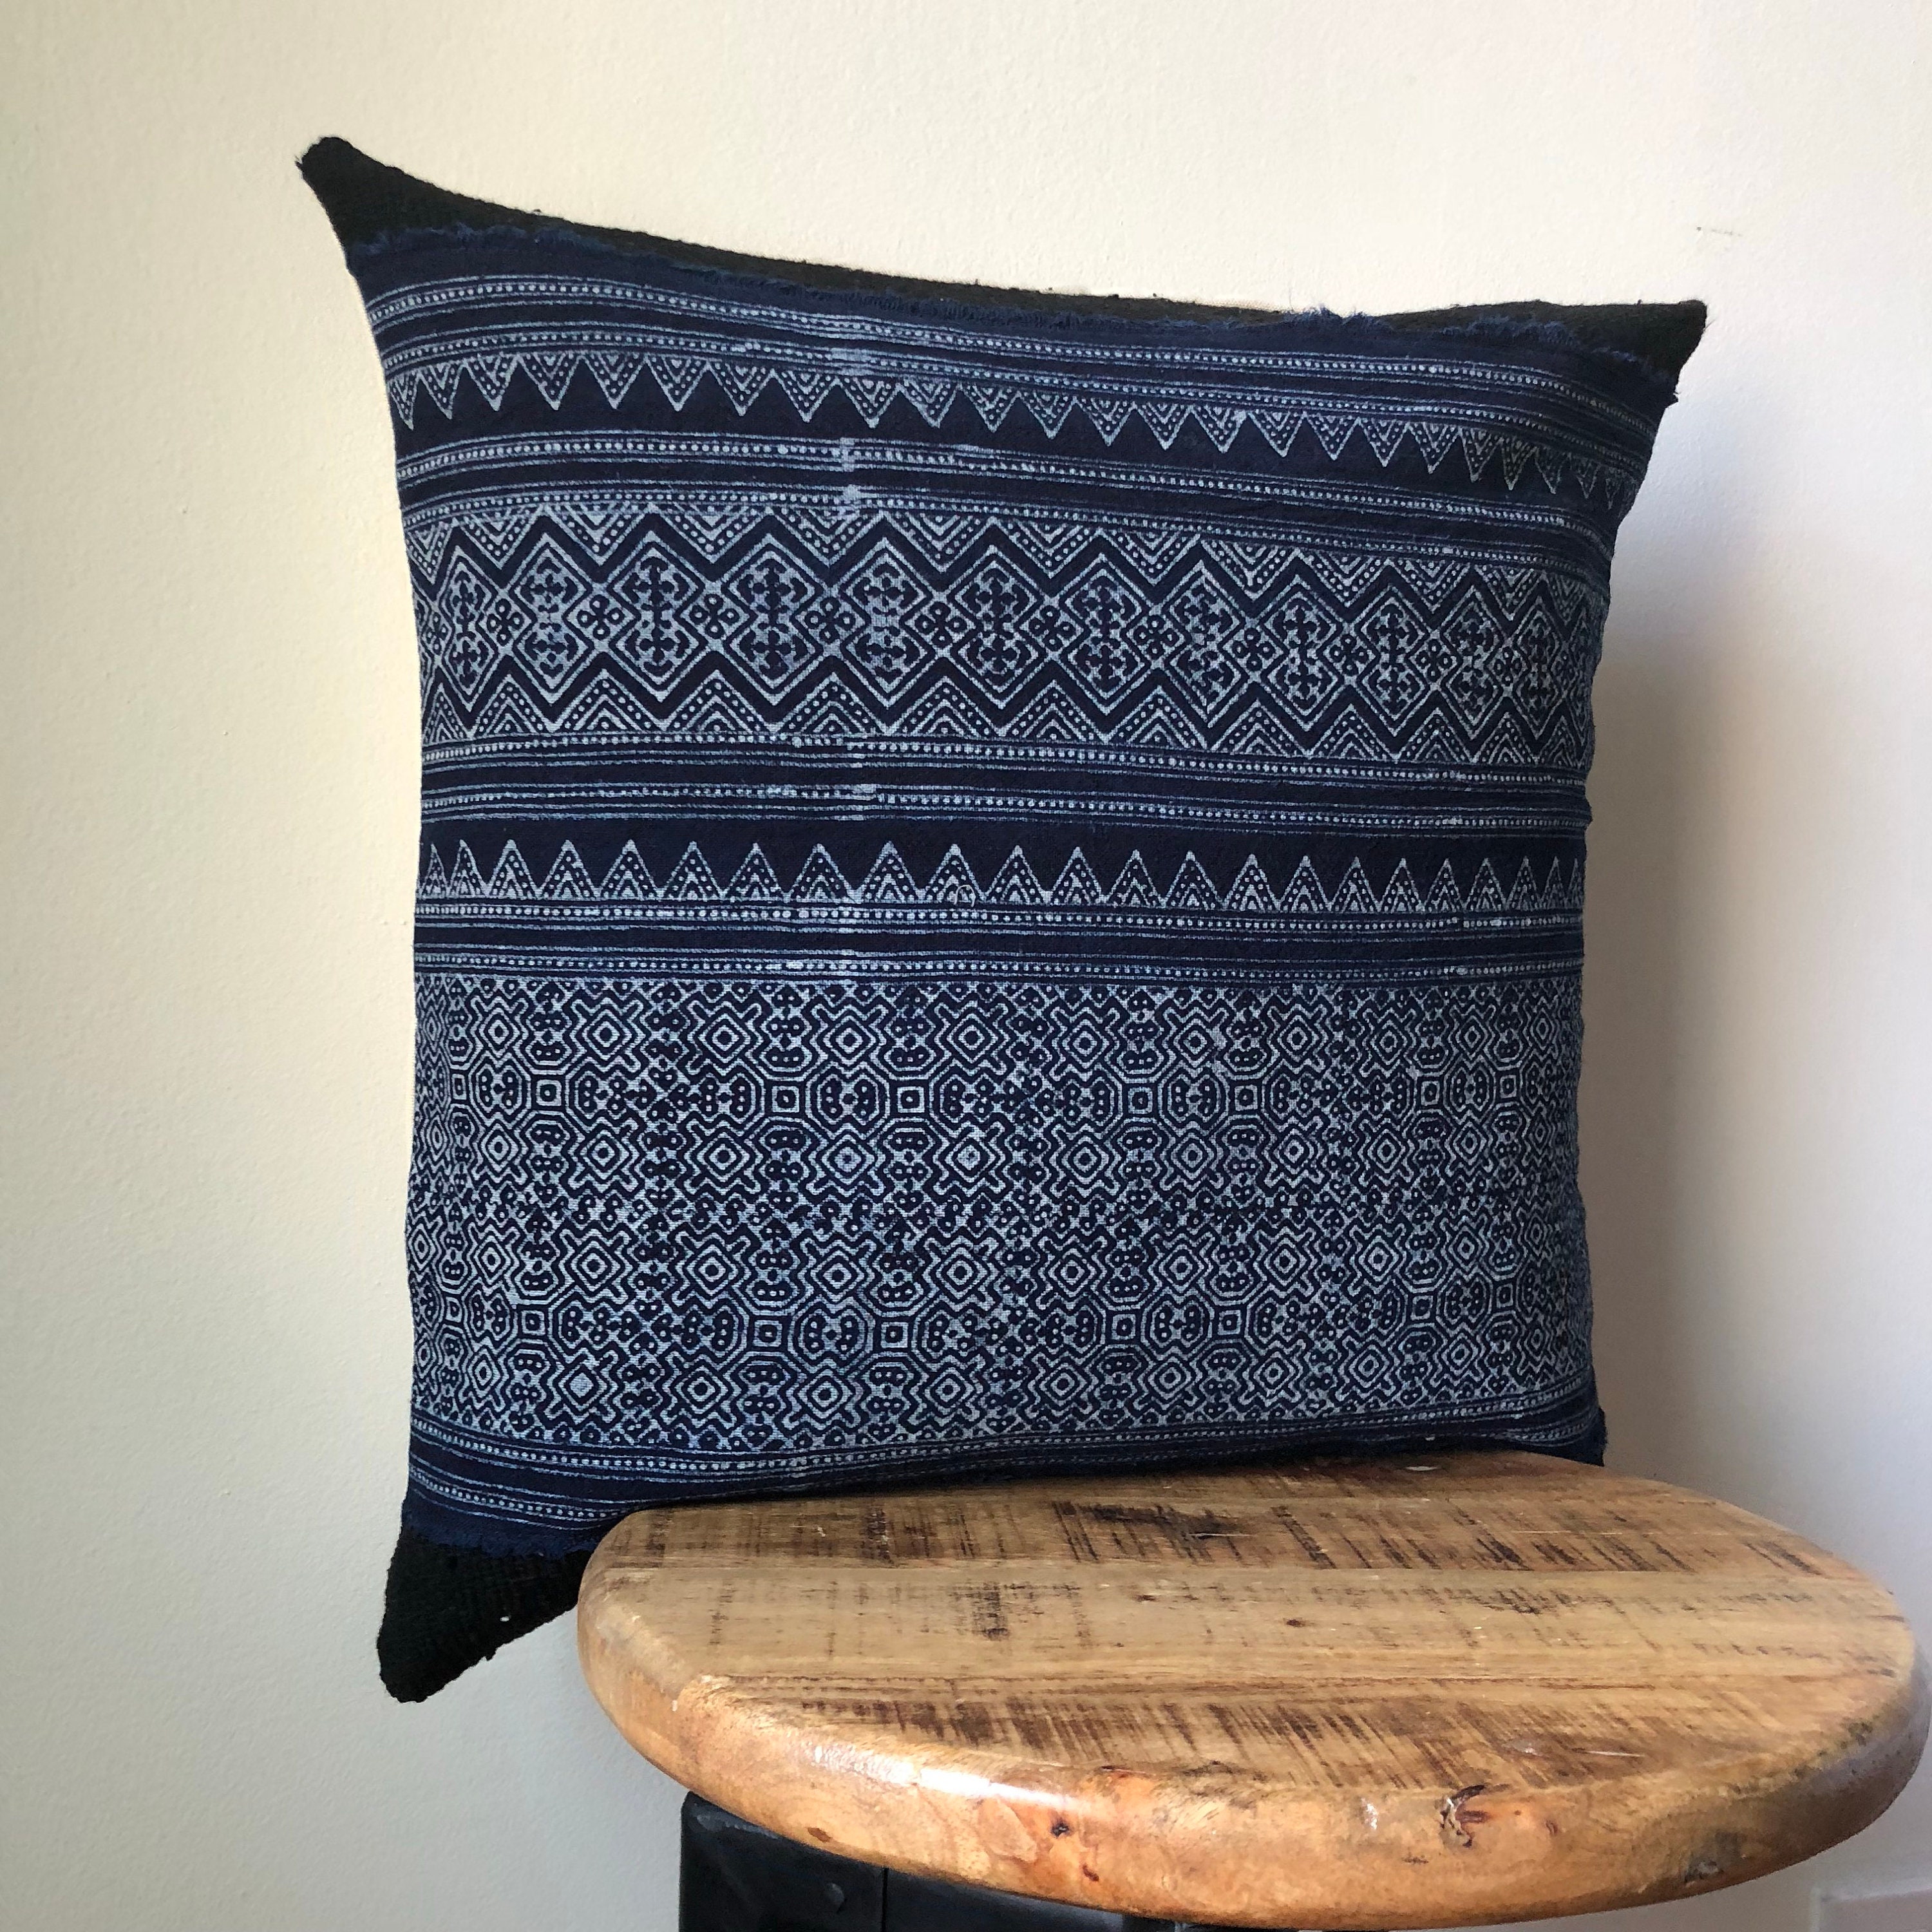 Mudcloth and Hmong Indigo and Black Tribal Pillow Cover - Etsy